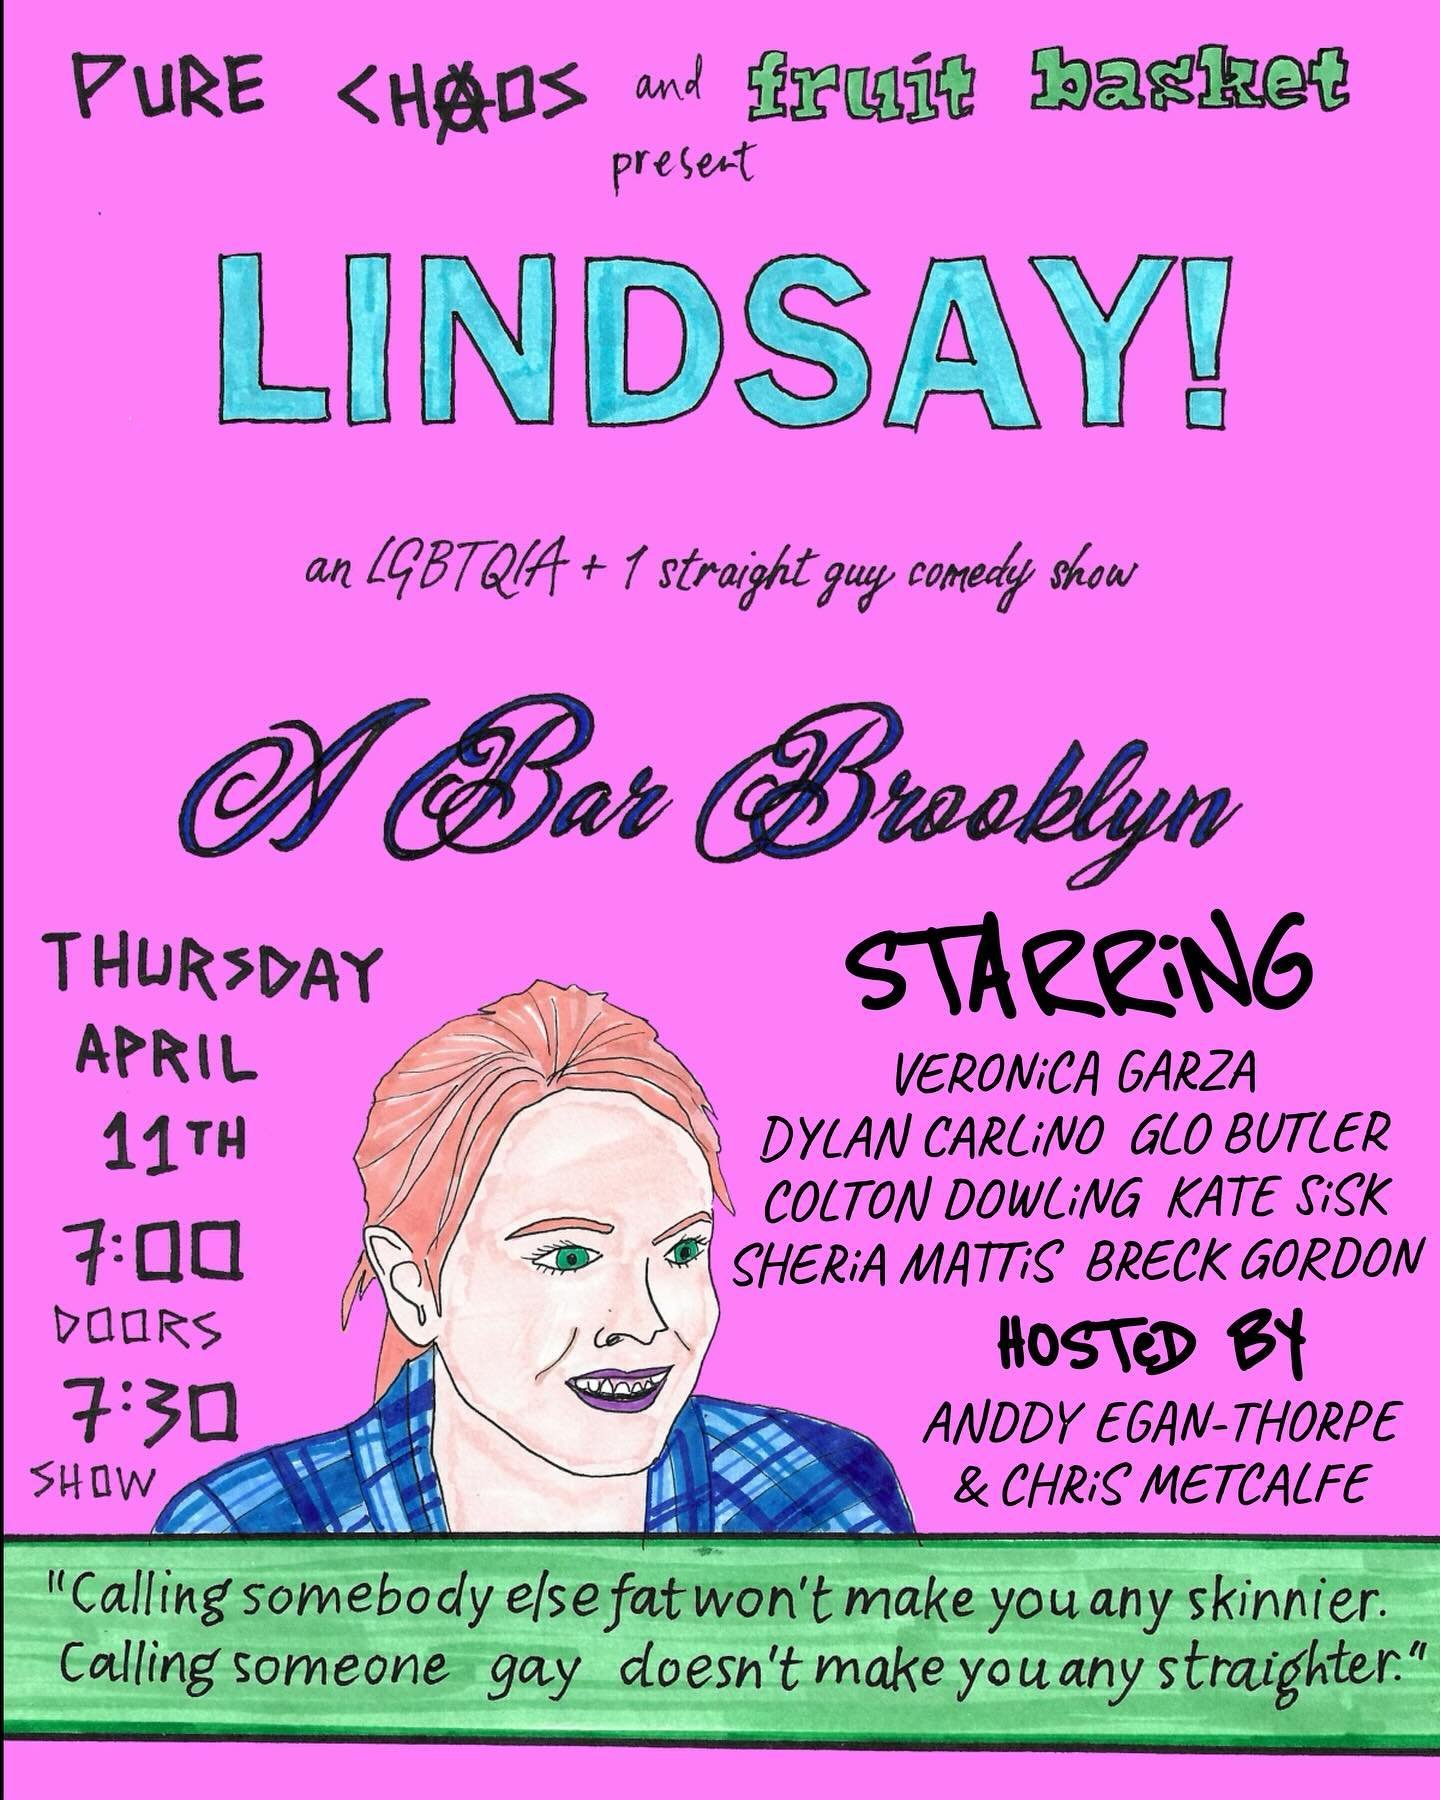 Come on out tomorrow night for @purechaoscomedy Lindsay! Doors 7/Show 730! @trap_of_glass behind the bar and the yards open!